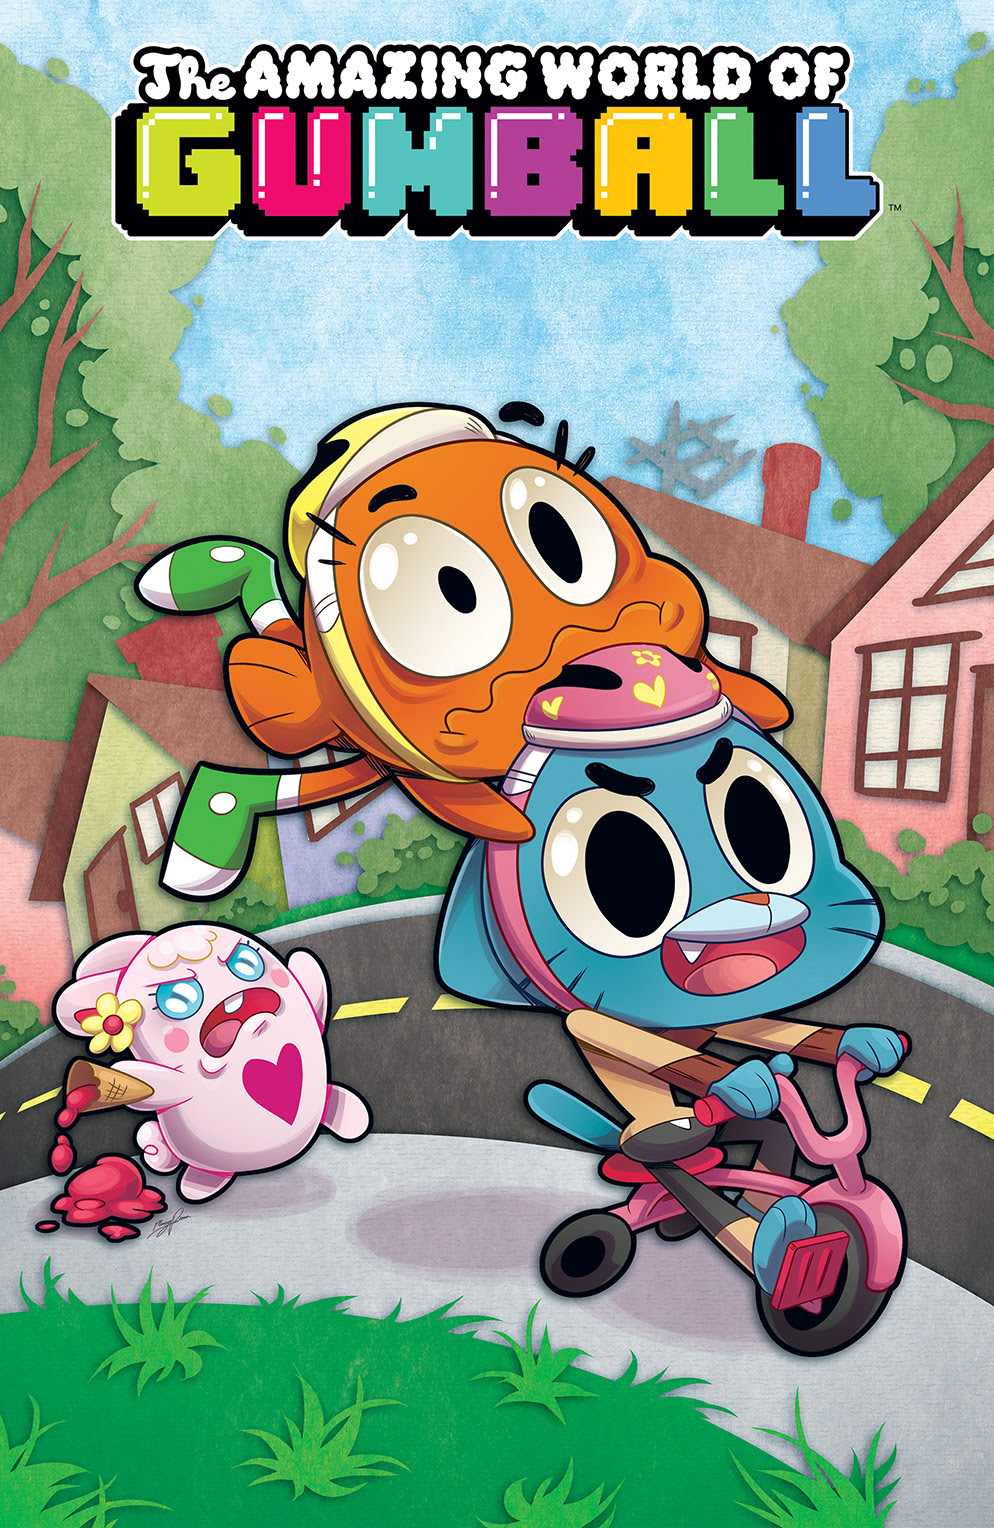 THE AMAZING WORLD OF GUMBALL #7 Cover A by Missy Pena